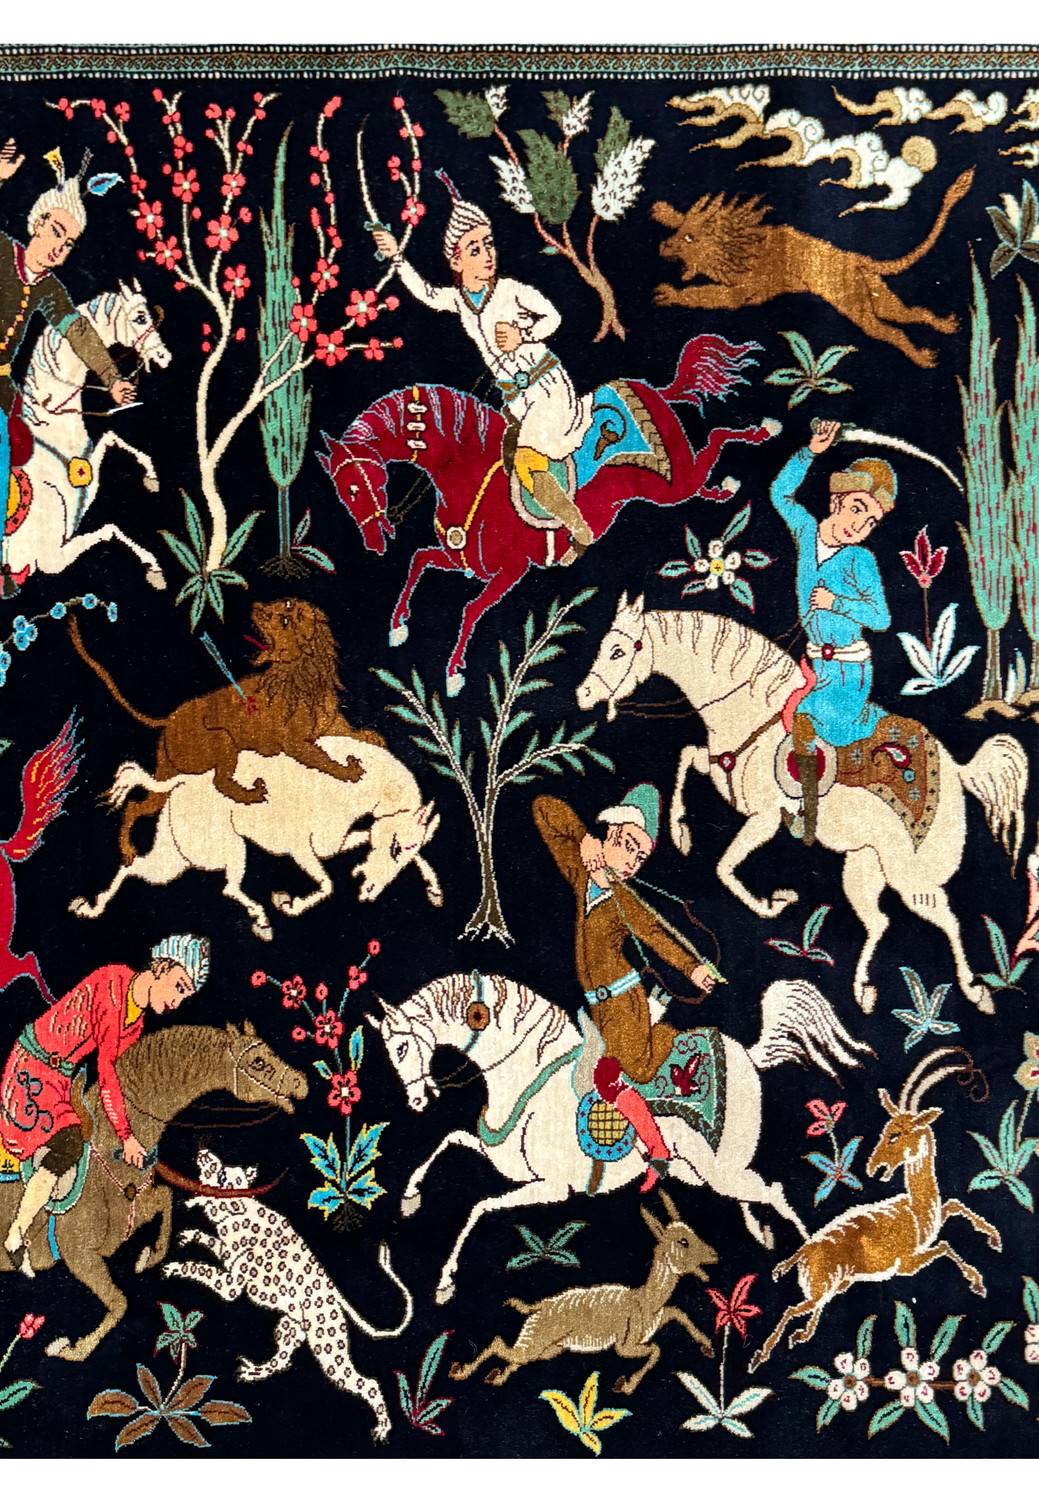 Detailed close-up of a section of Persian Qum Silk Hunting Rug with hunters and animals, emphasizing the vibrant colors and narrative design